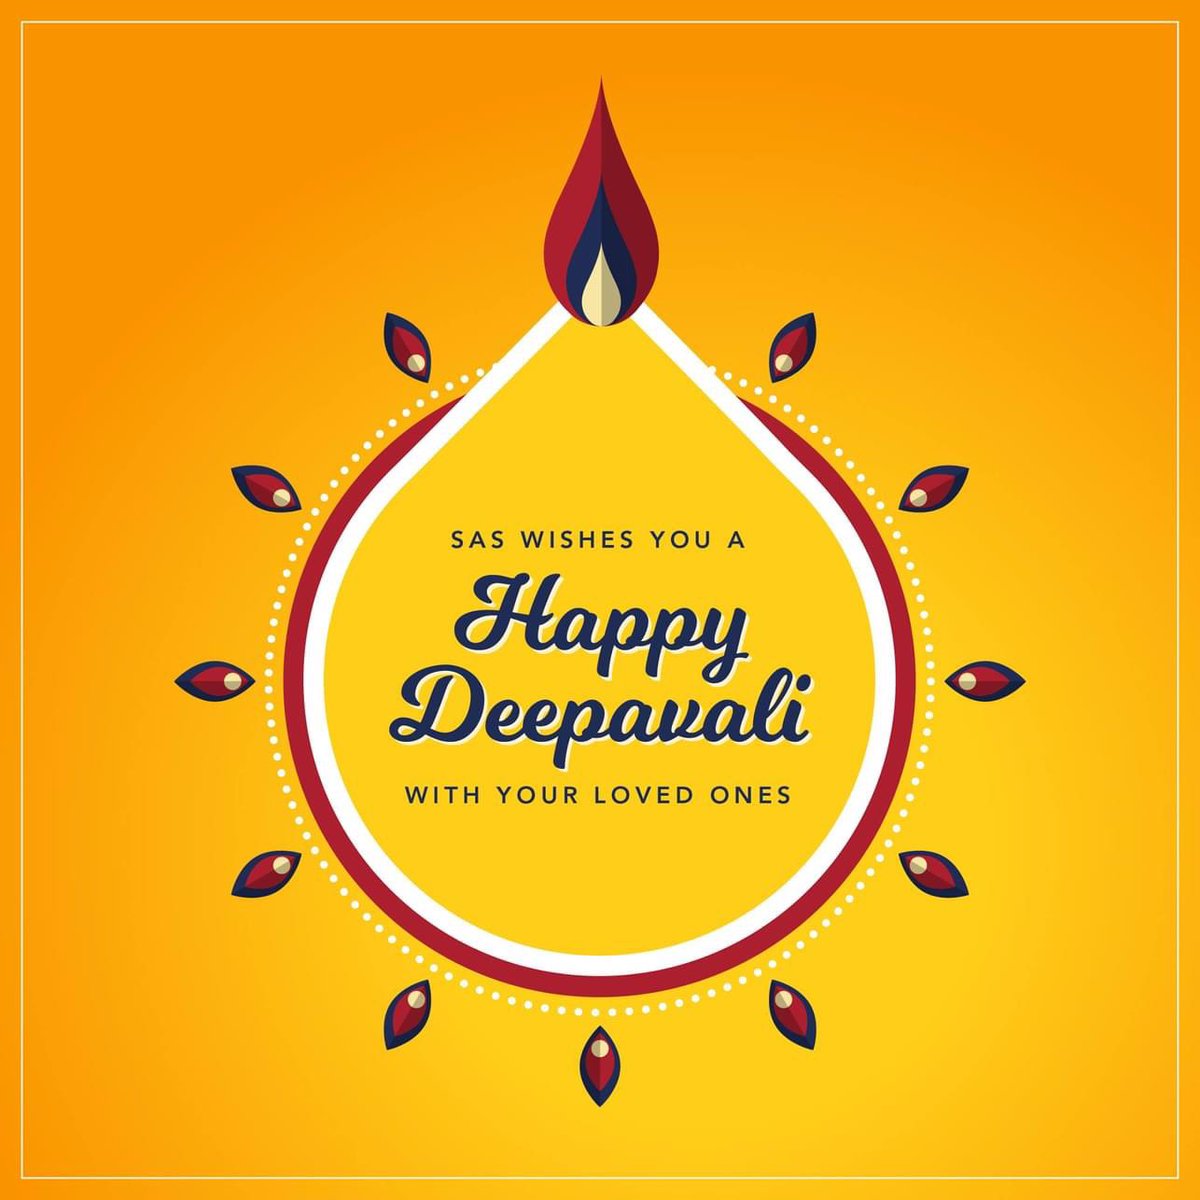 Deepavali, also known as Diwali, is one of the Hindu religion’s oldest and biggest festivals, commemorating the victory of light over darkness and good over evil. Learn more about the Festival of Lights: bit.ly/3FWMQ1c We wish everyone a very happy Deepavali! #SASedu